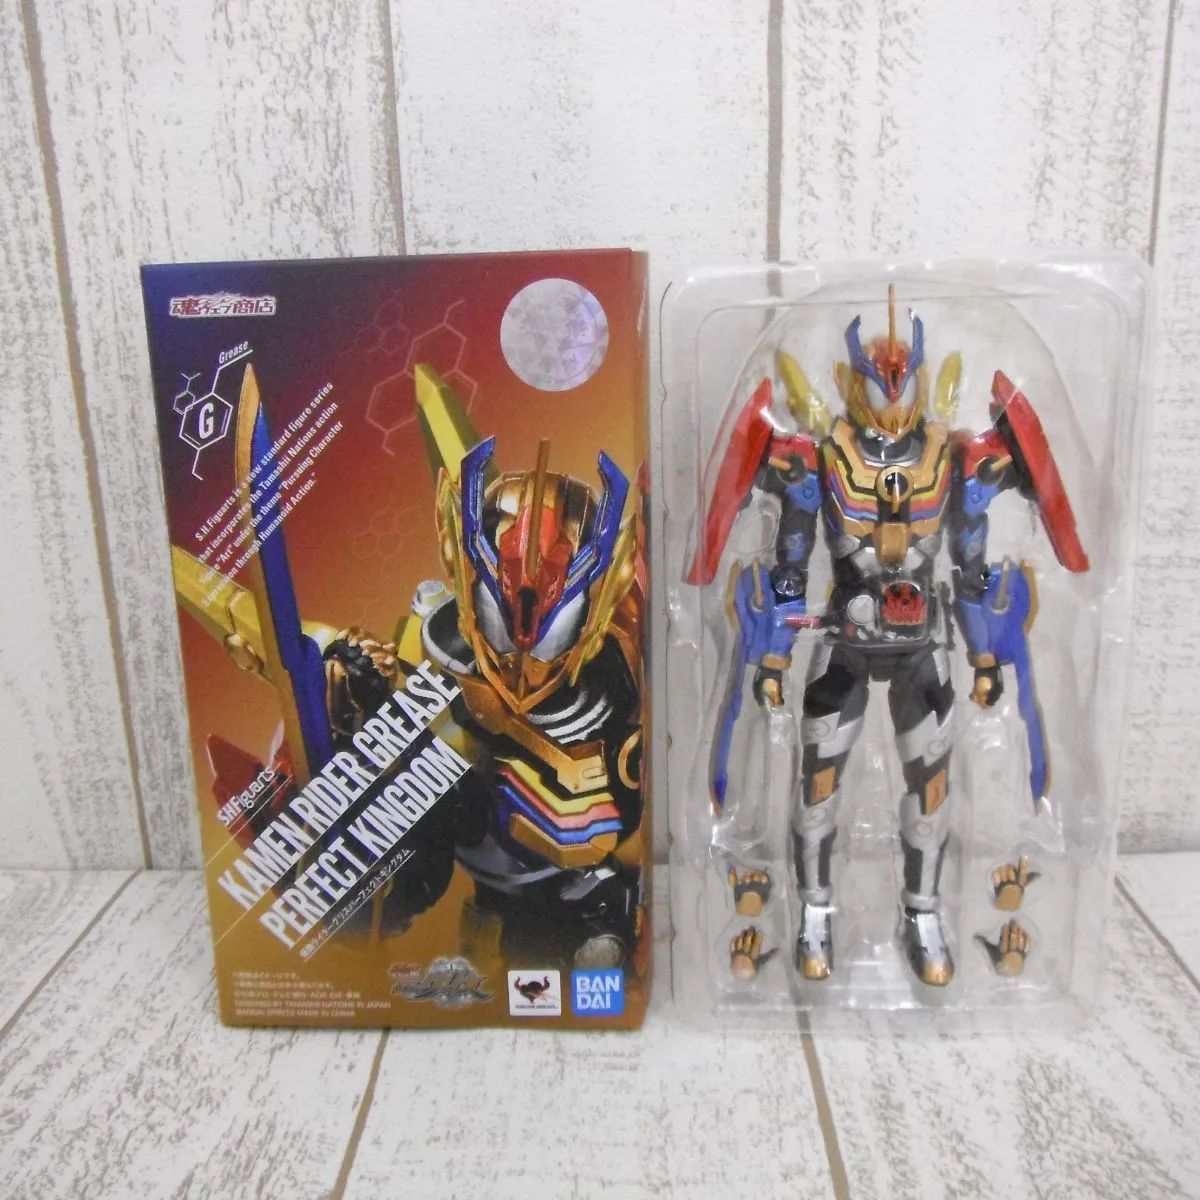 067 S.H.Figuarts 仮面ライダーグリス パーフェクト キングダム 開封品 ...